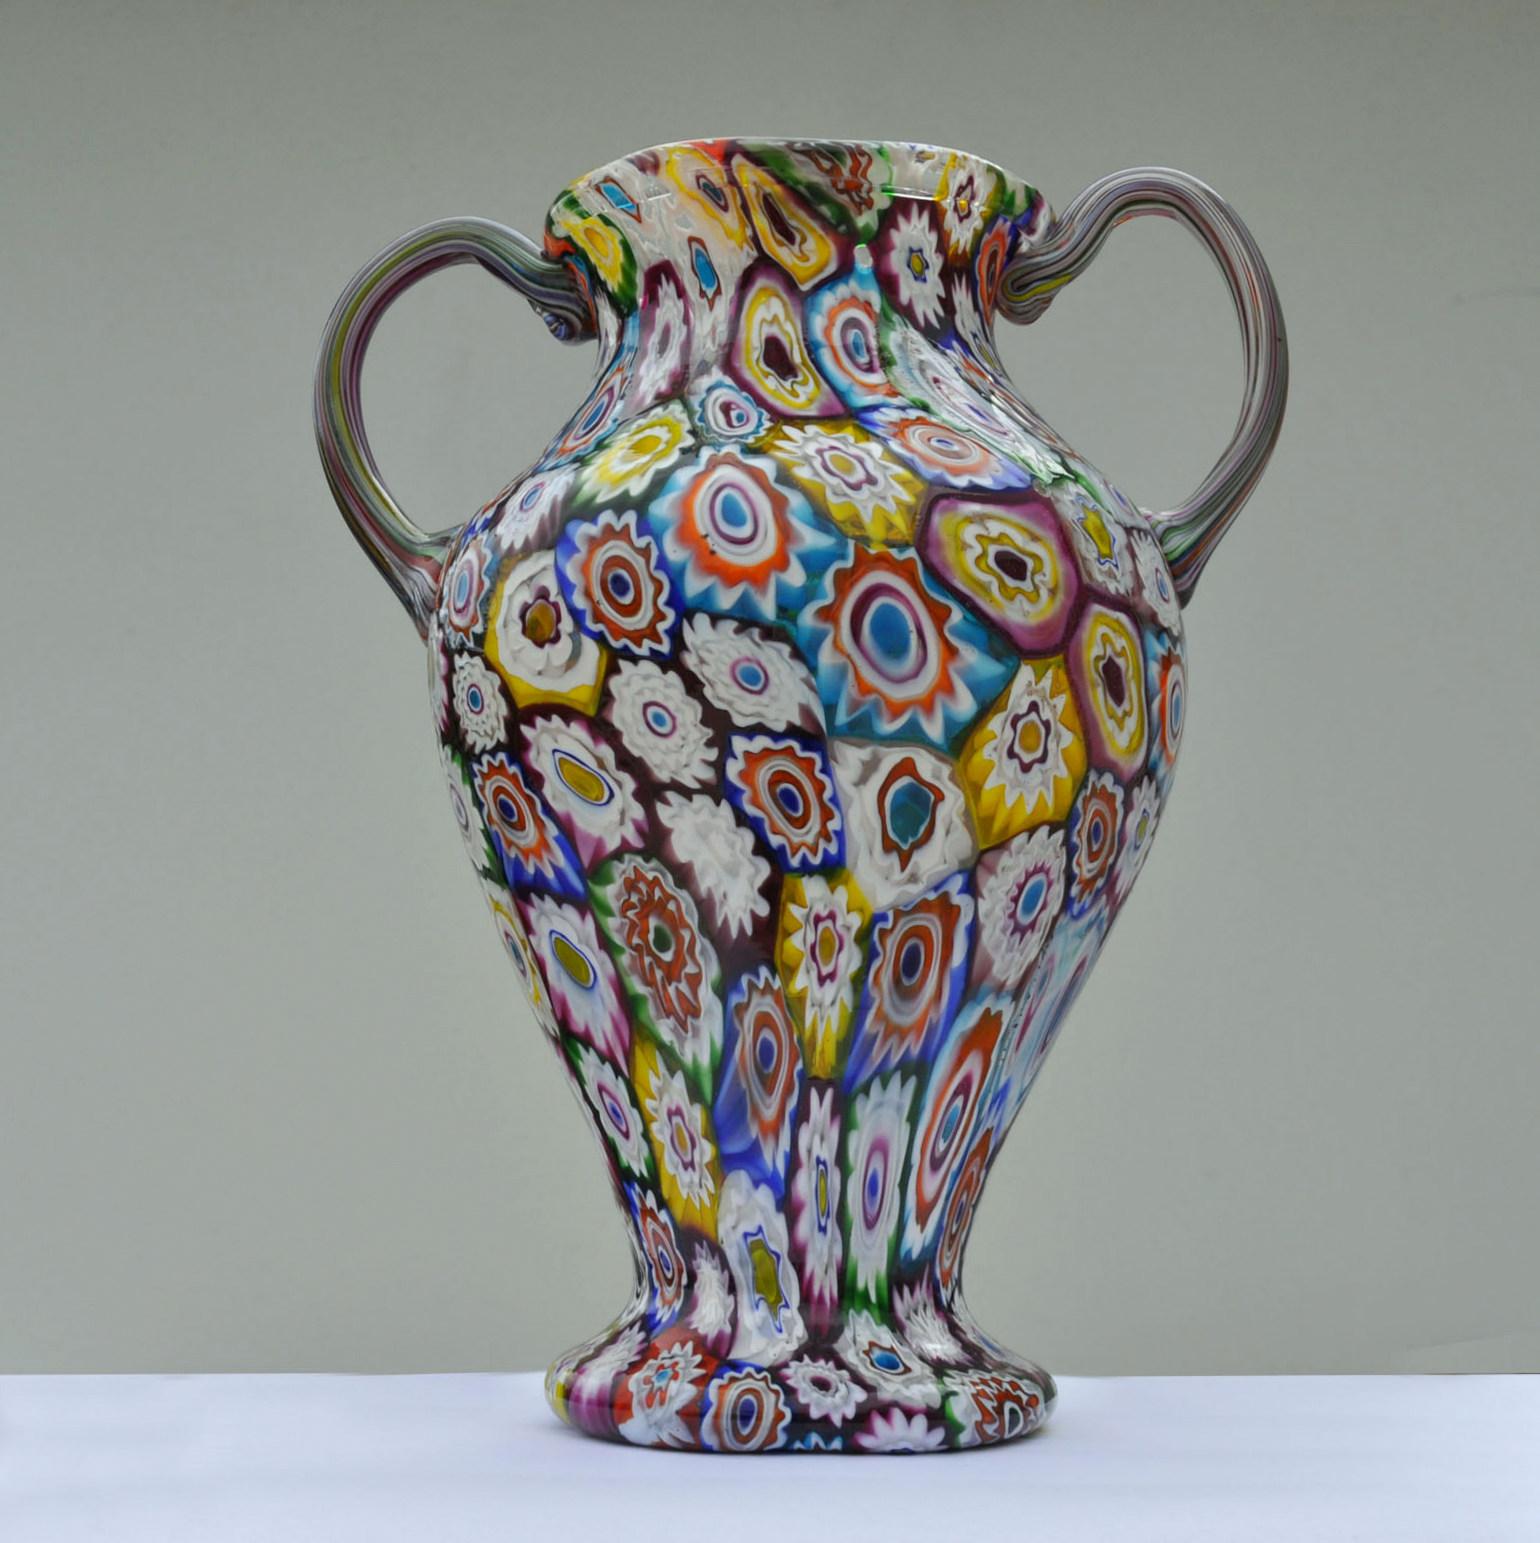 Hand-Crafted Murano Millefiori Glass Double Handled Monumental Vase Fratelli Toso, 1920s